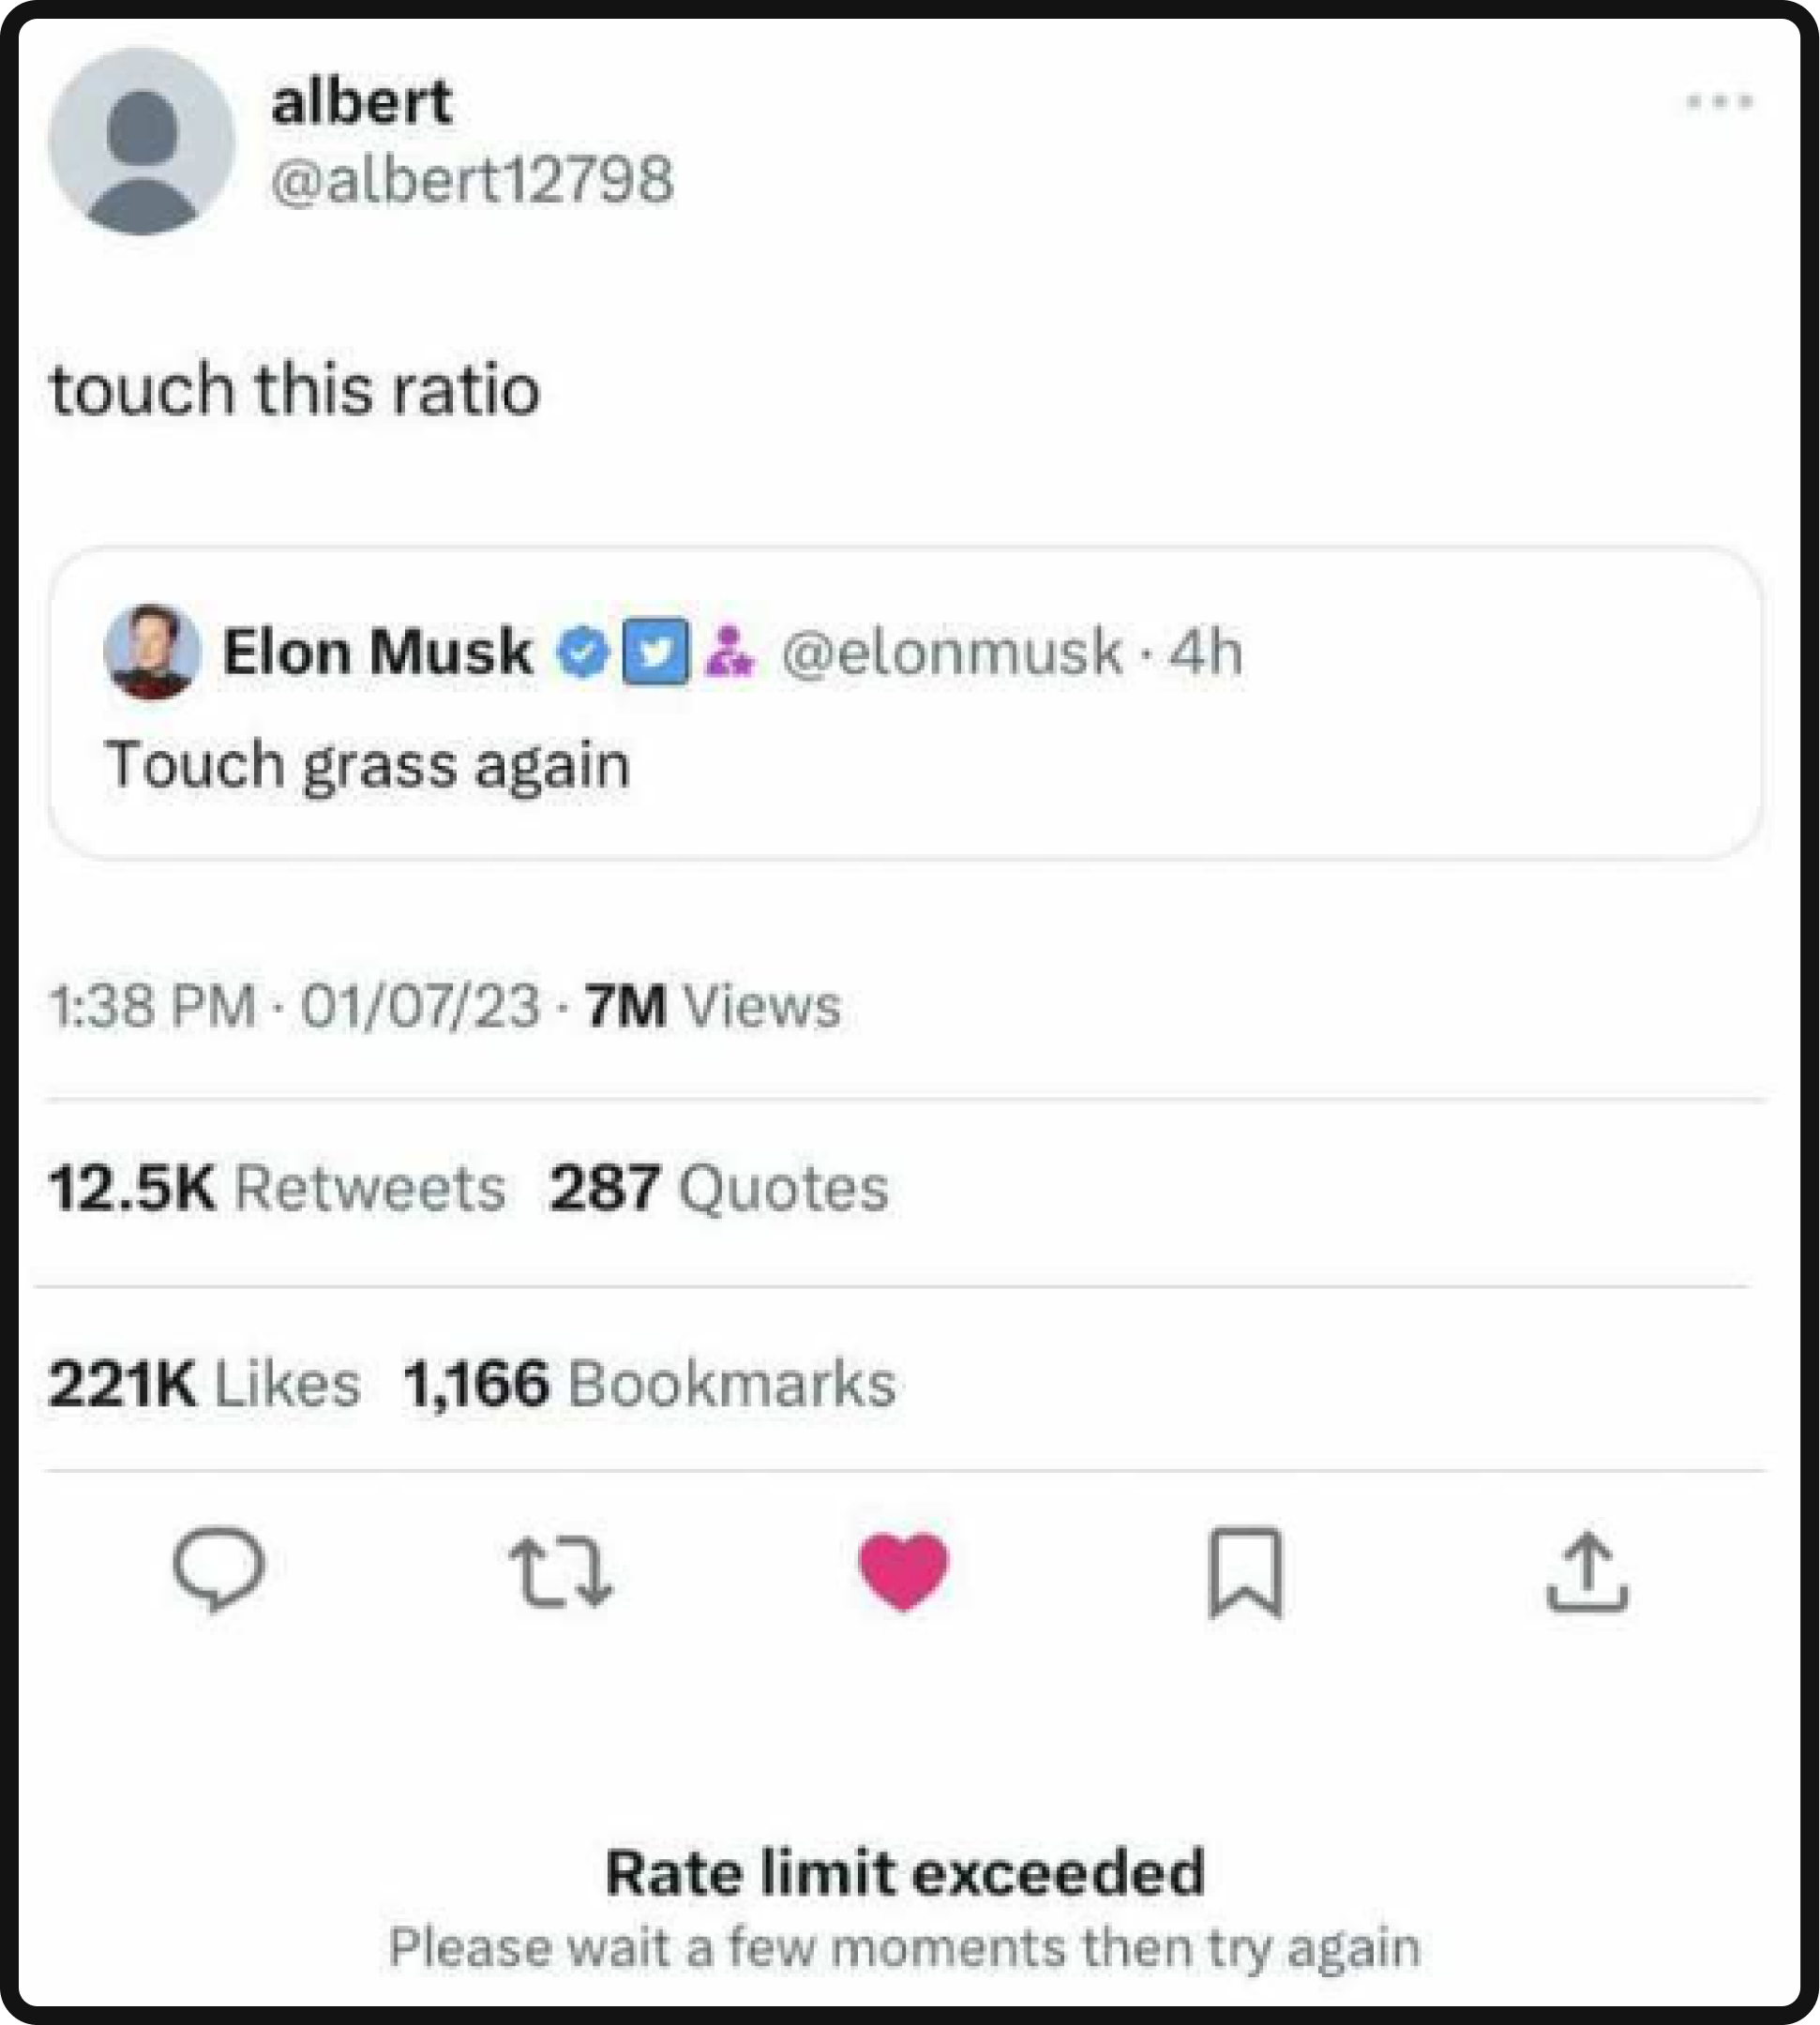 Elon Musk's tweet related to users' rate limit being exceeded. 